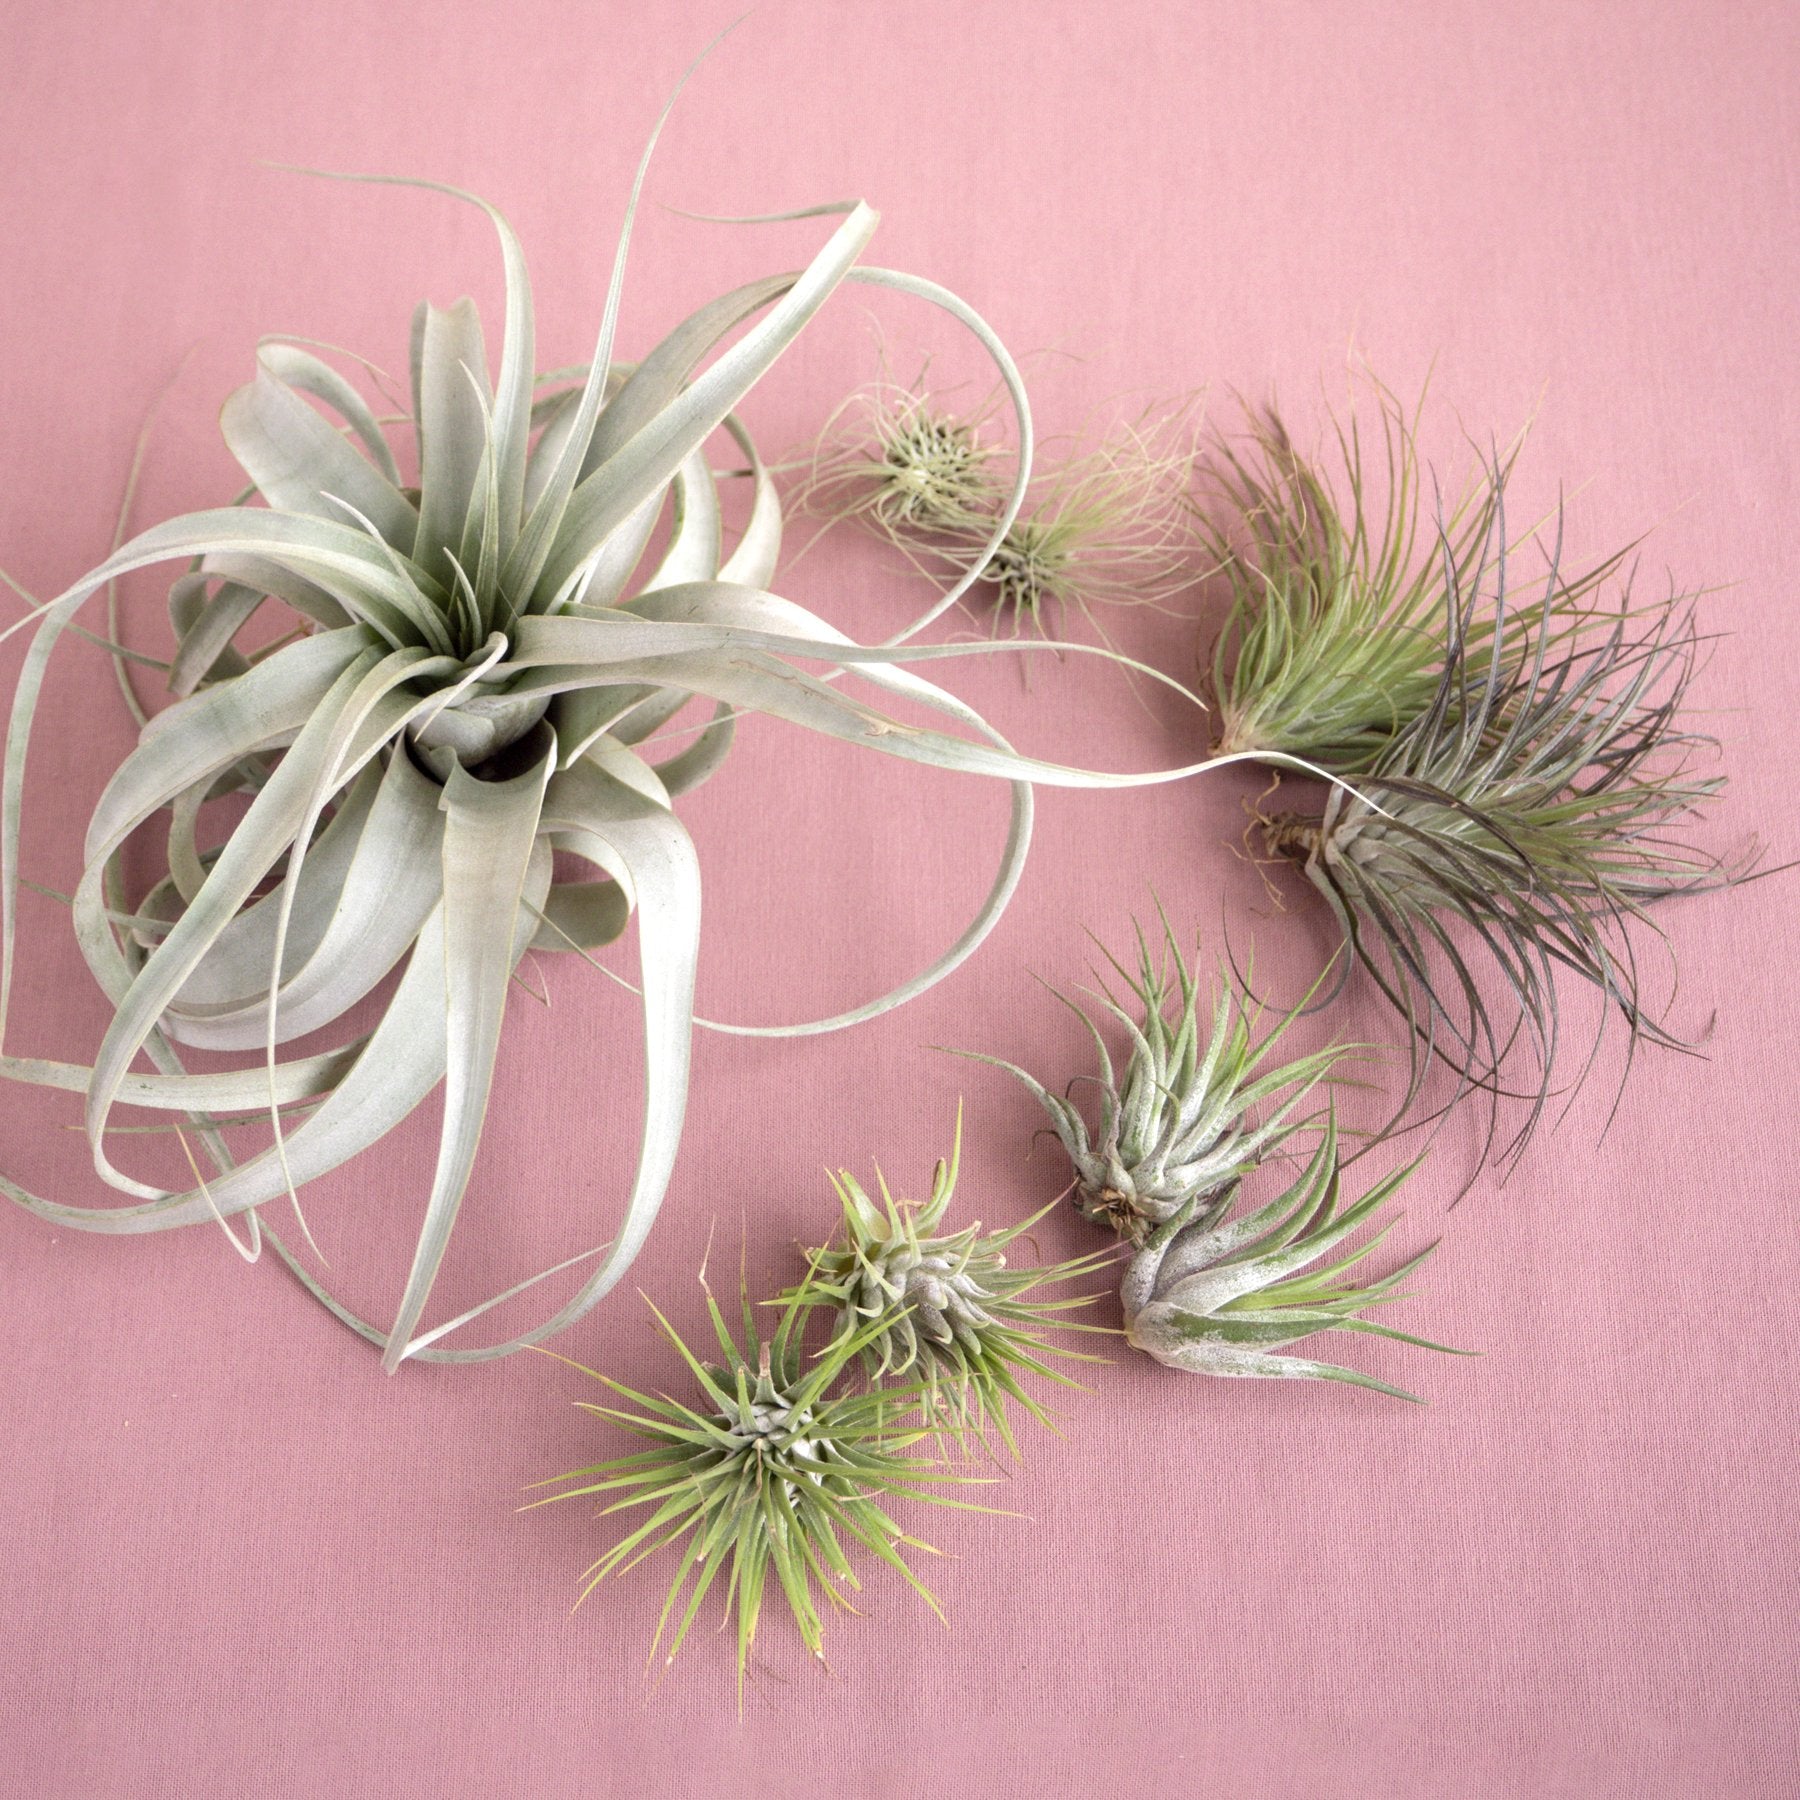 A vibrant display of air plants on a pink background at the best plant nursery near me.